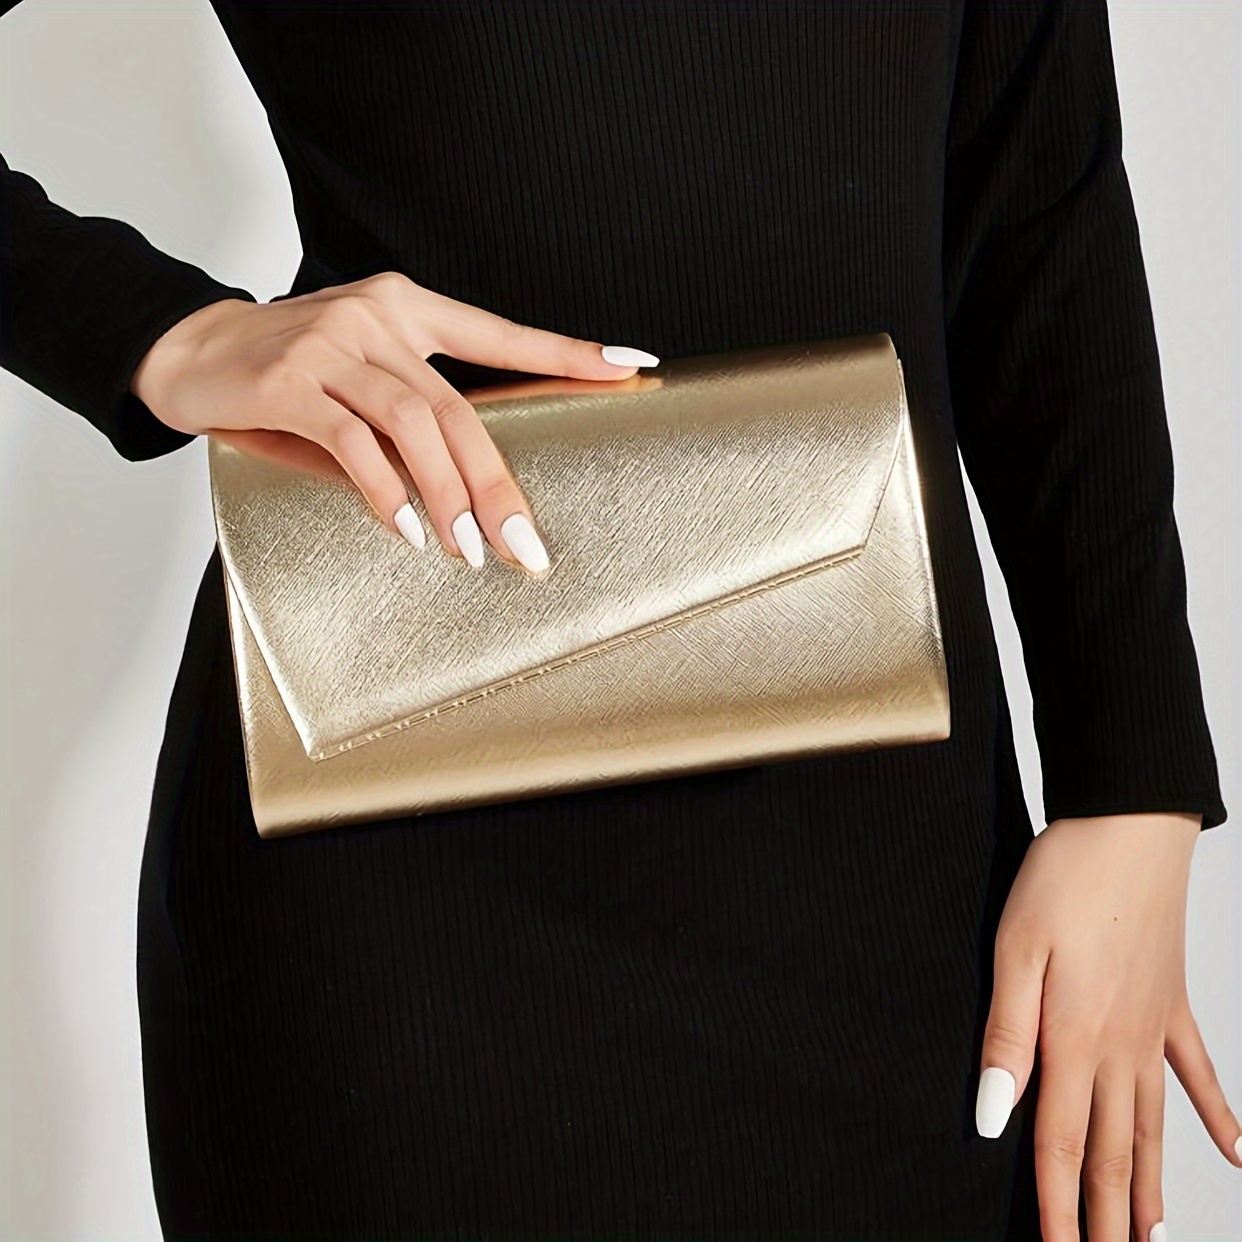 

Elegant Evening Clutch With Chain Strap, Asymmetrical Flap, Textured Faux Leather, Perfect For Wedding Party Events